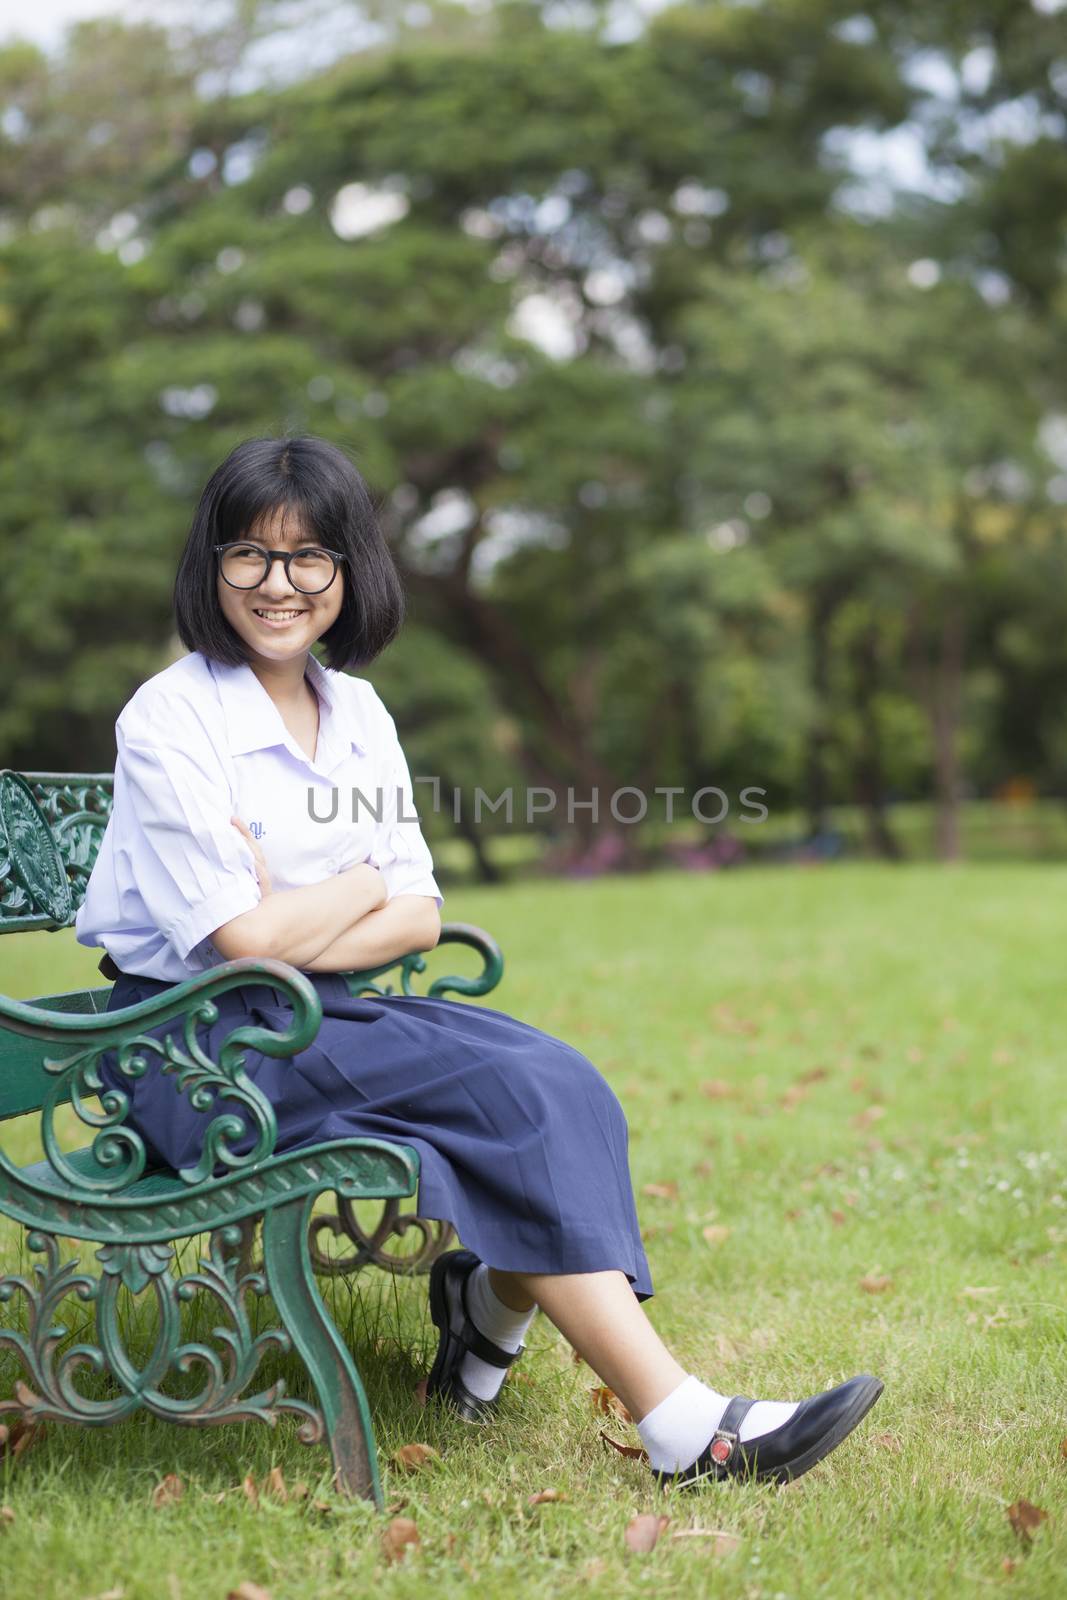 Girl smile and sitting on the bench. Look happy and relaxed. In a shady park.